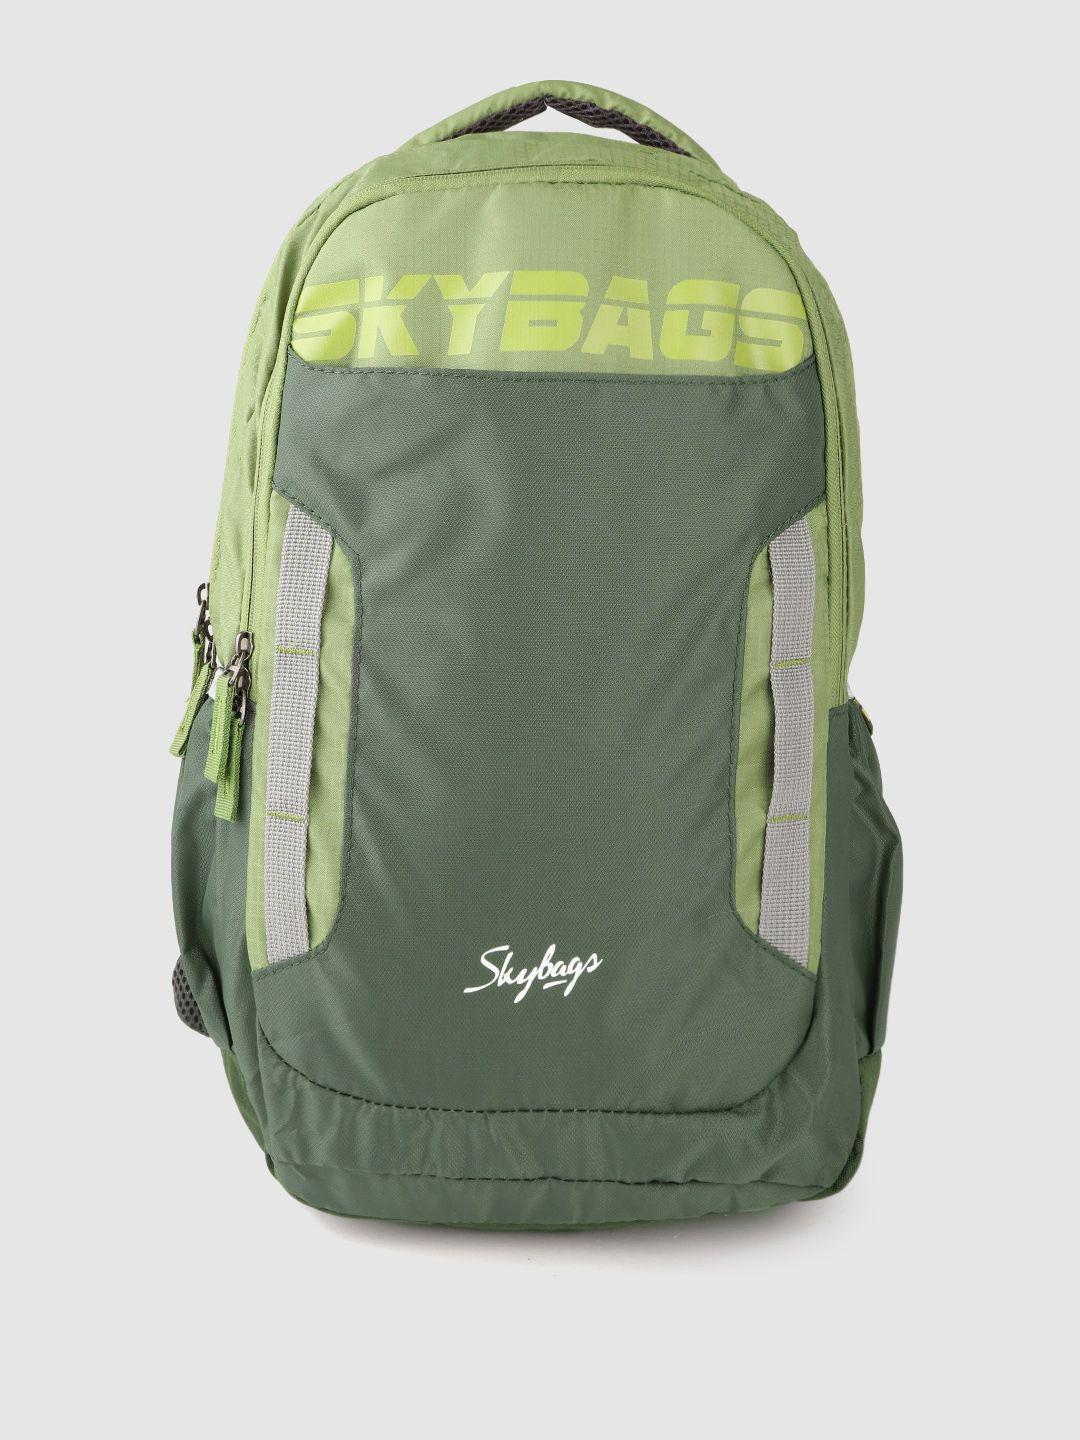 skybags unisex green brand logo print backpack